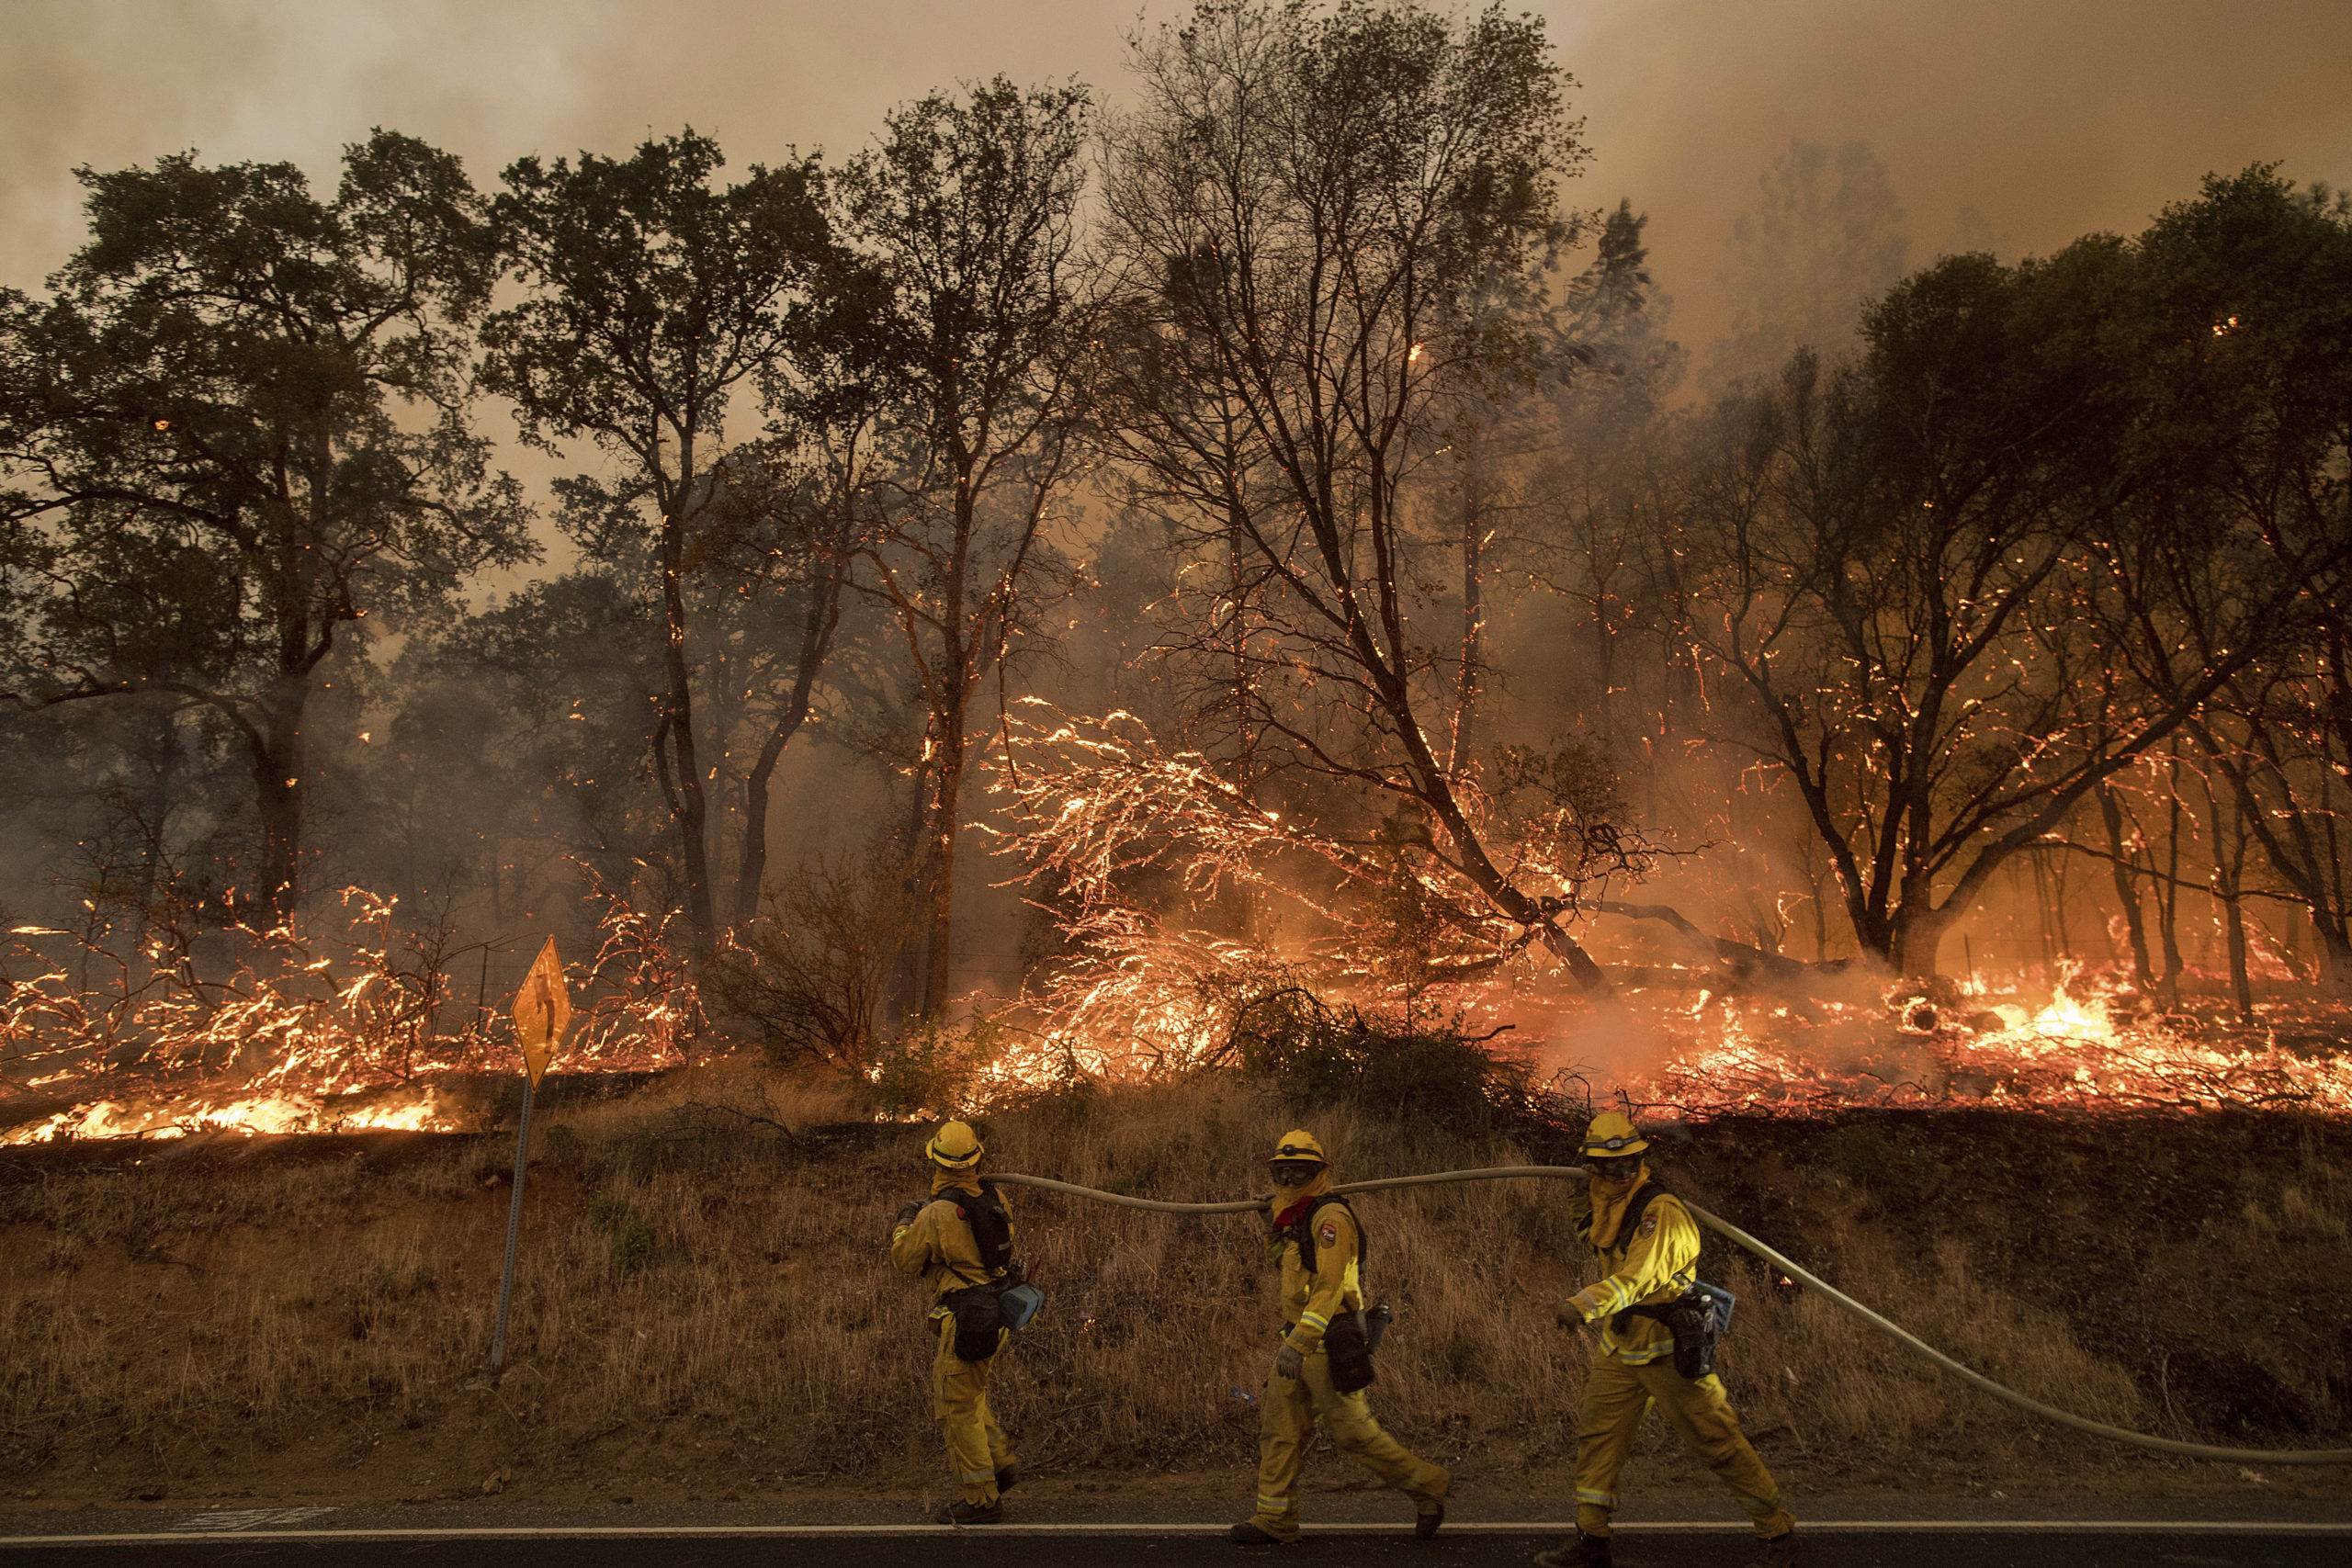 Hundreds Of Bushfires Are Barrelling Through The Western US And Canada